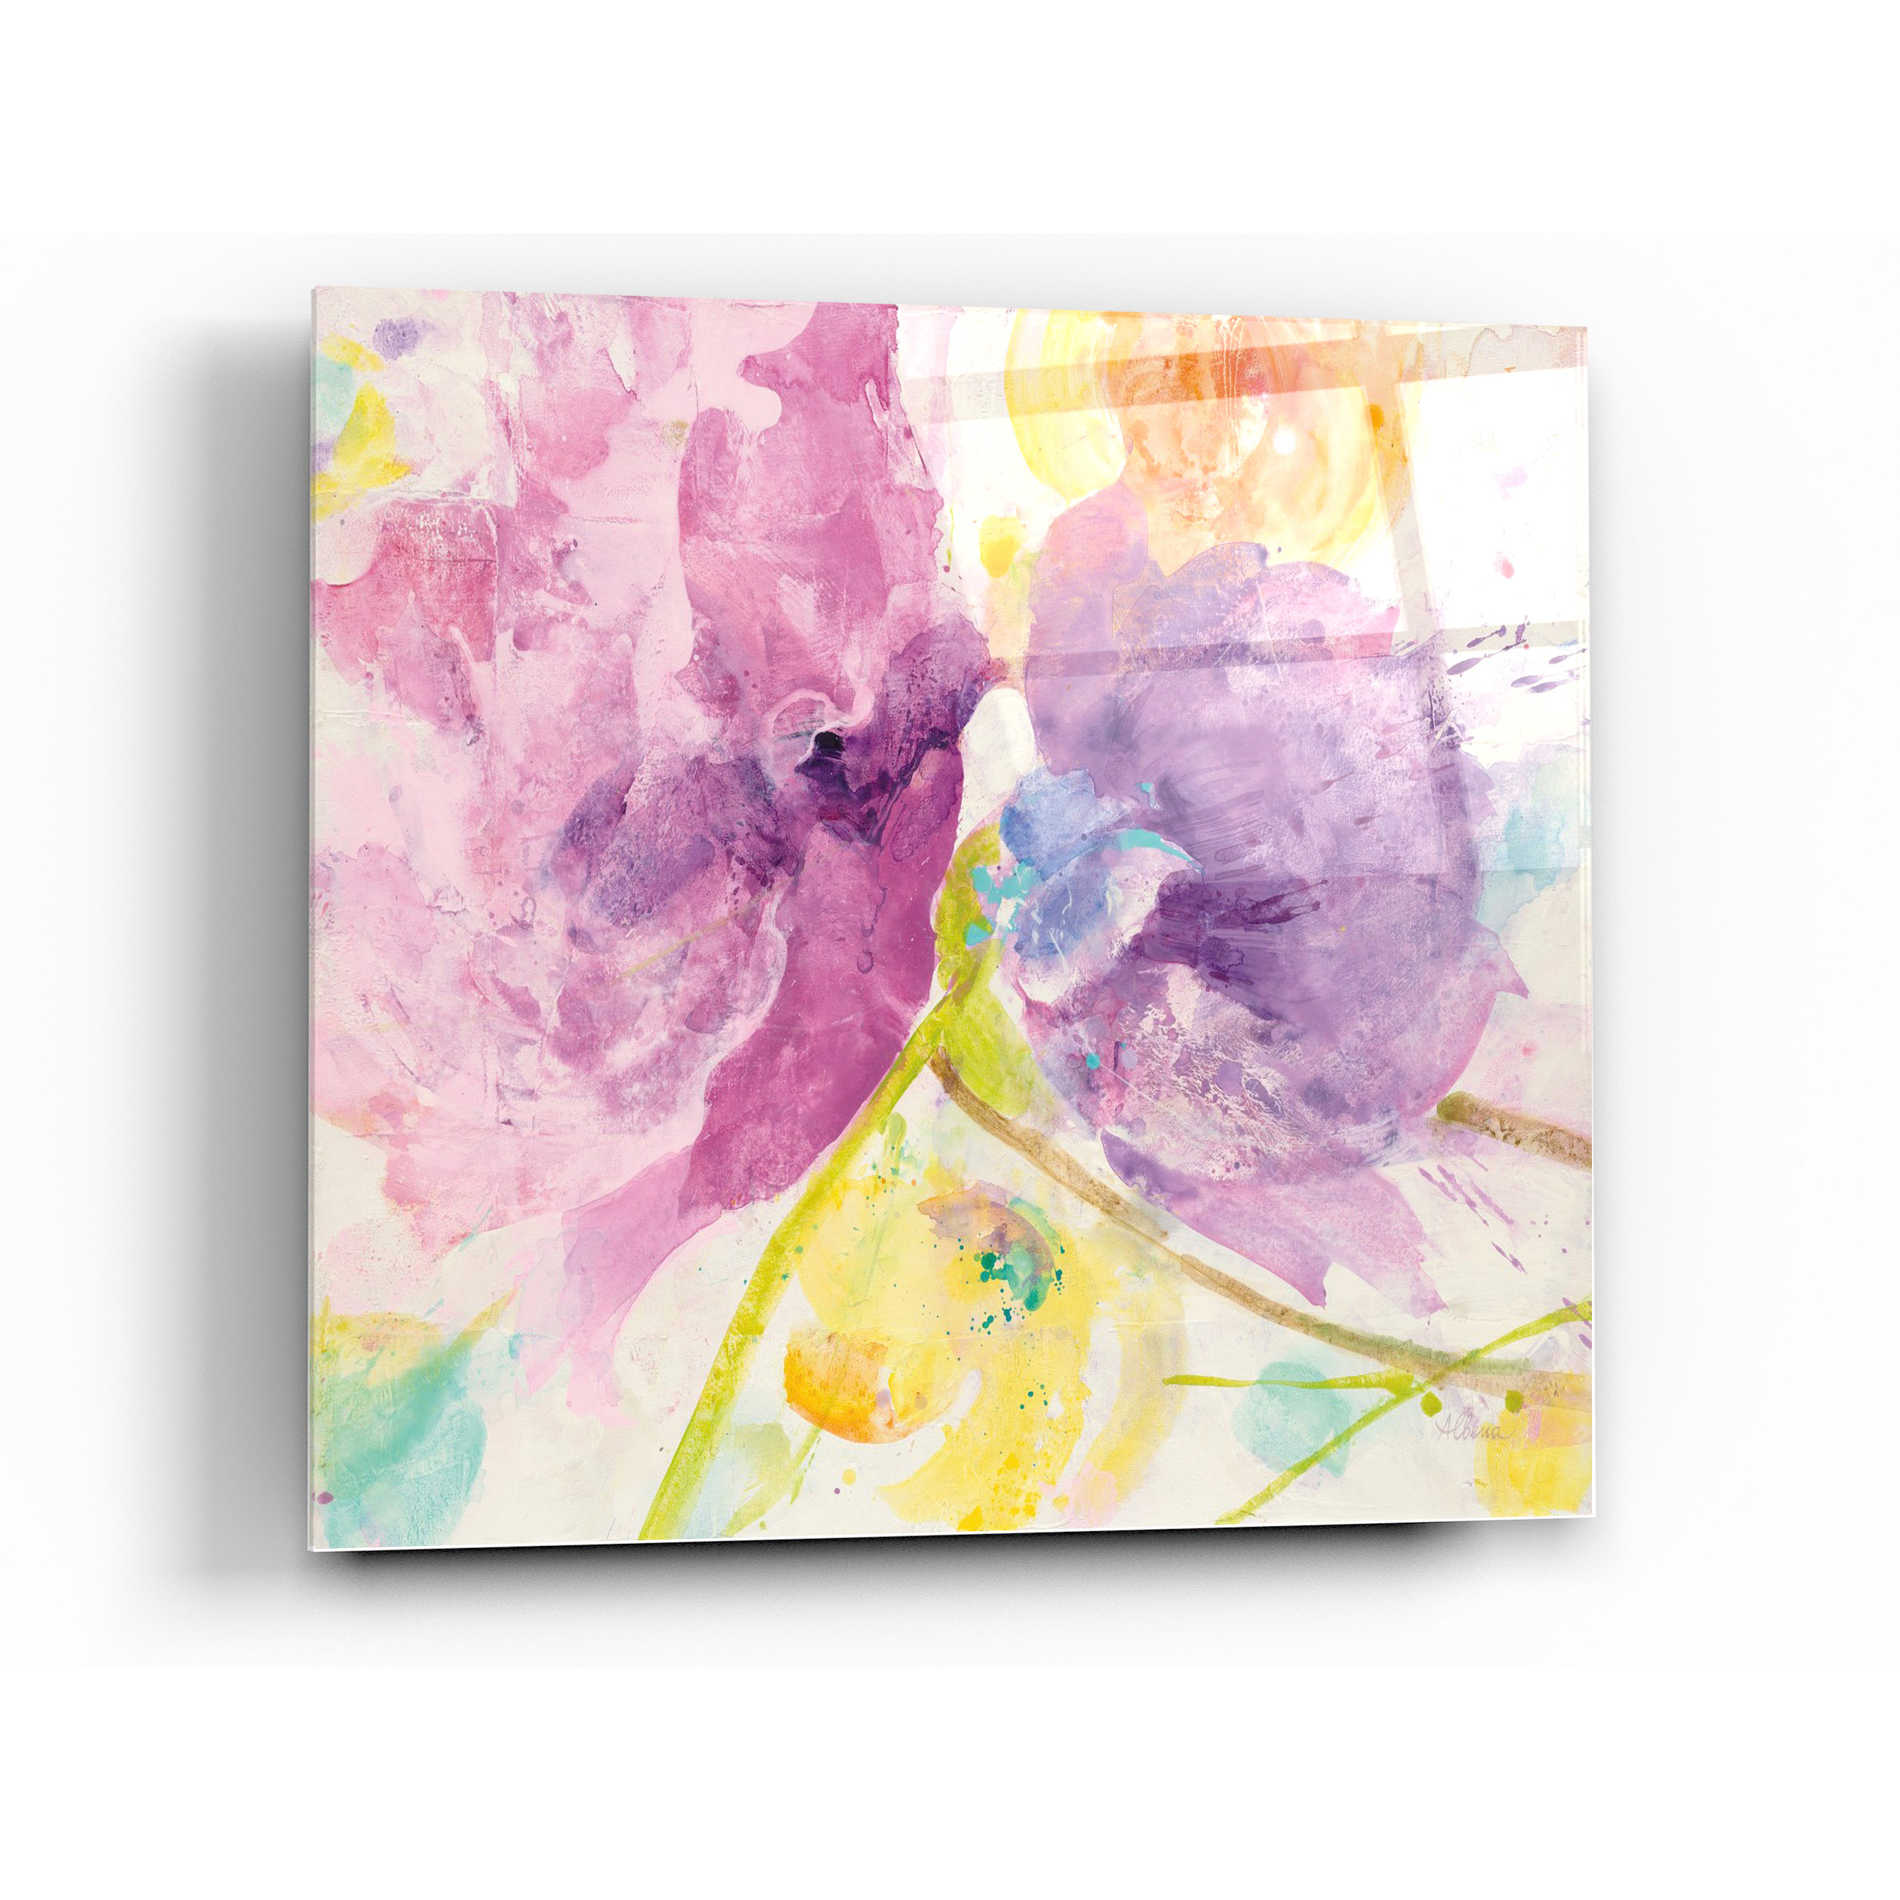 Epic Art 'Spring Abstracts Florals I' by Albena Hristova, Acrylic Glass Wall Art,24x24